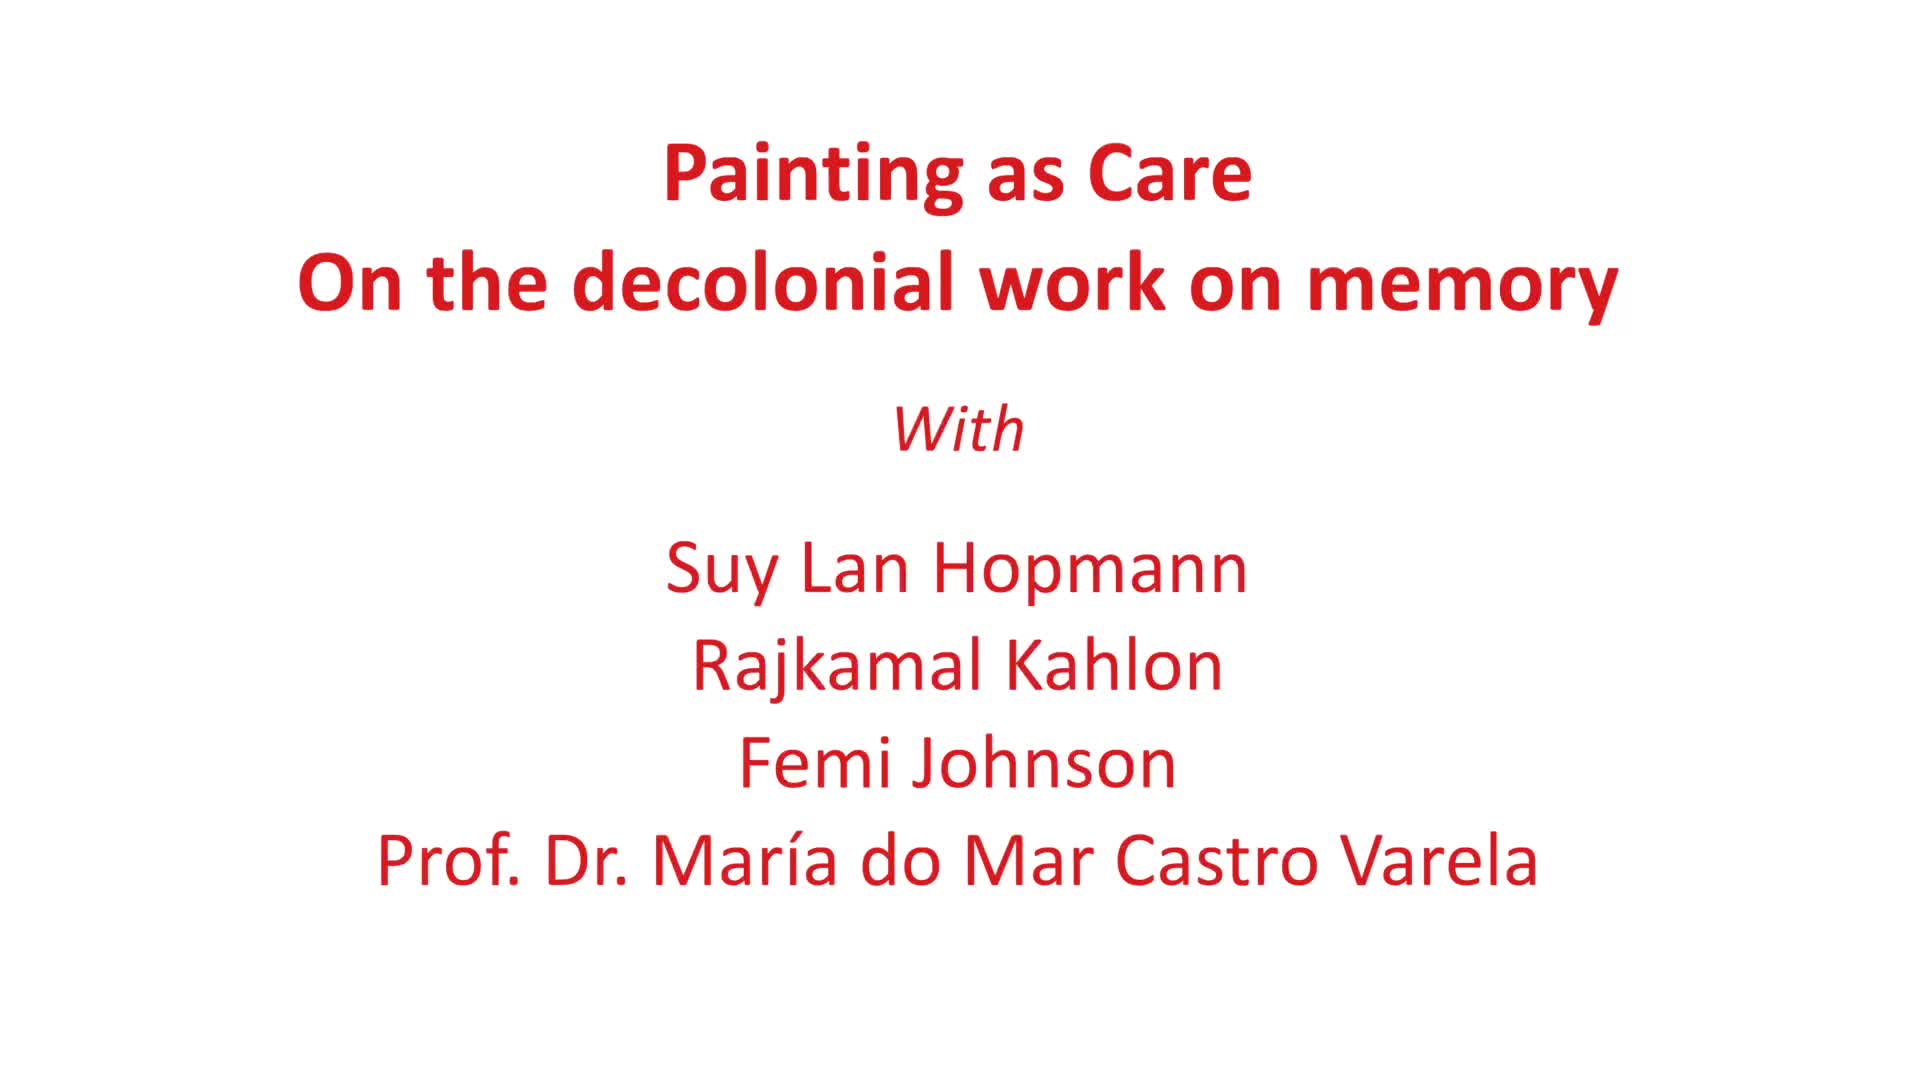 Thumbnail - Painting as Care - On the decolonial work on memory